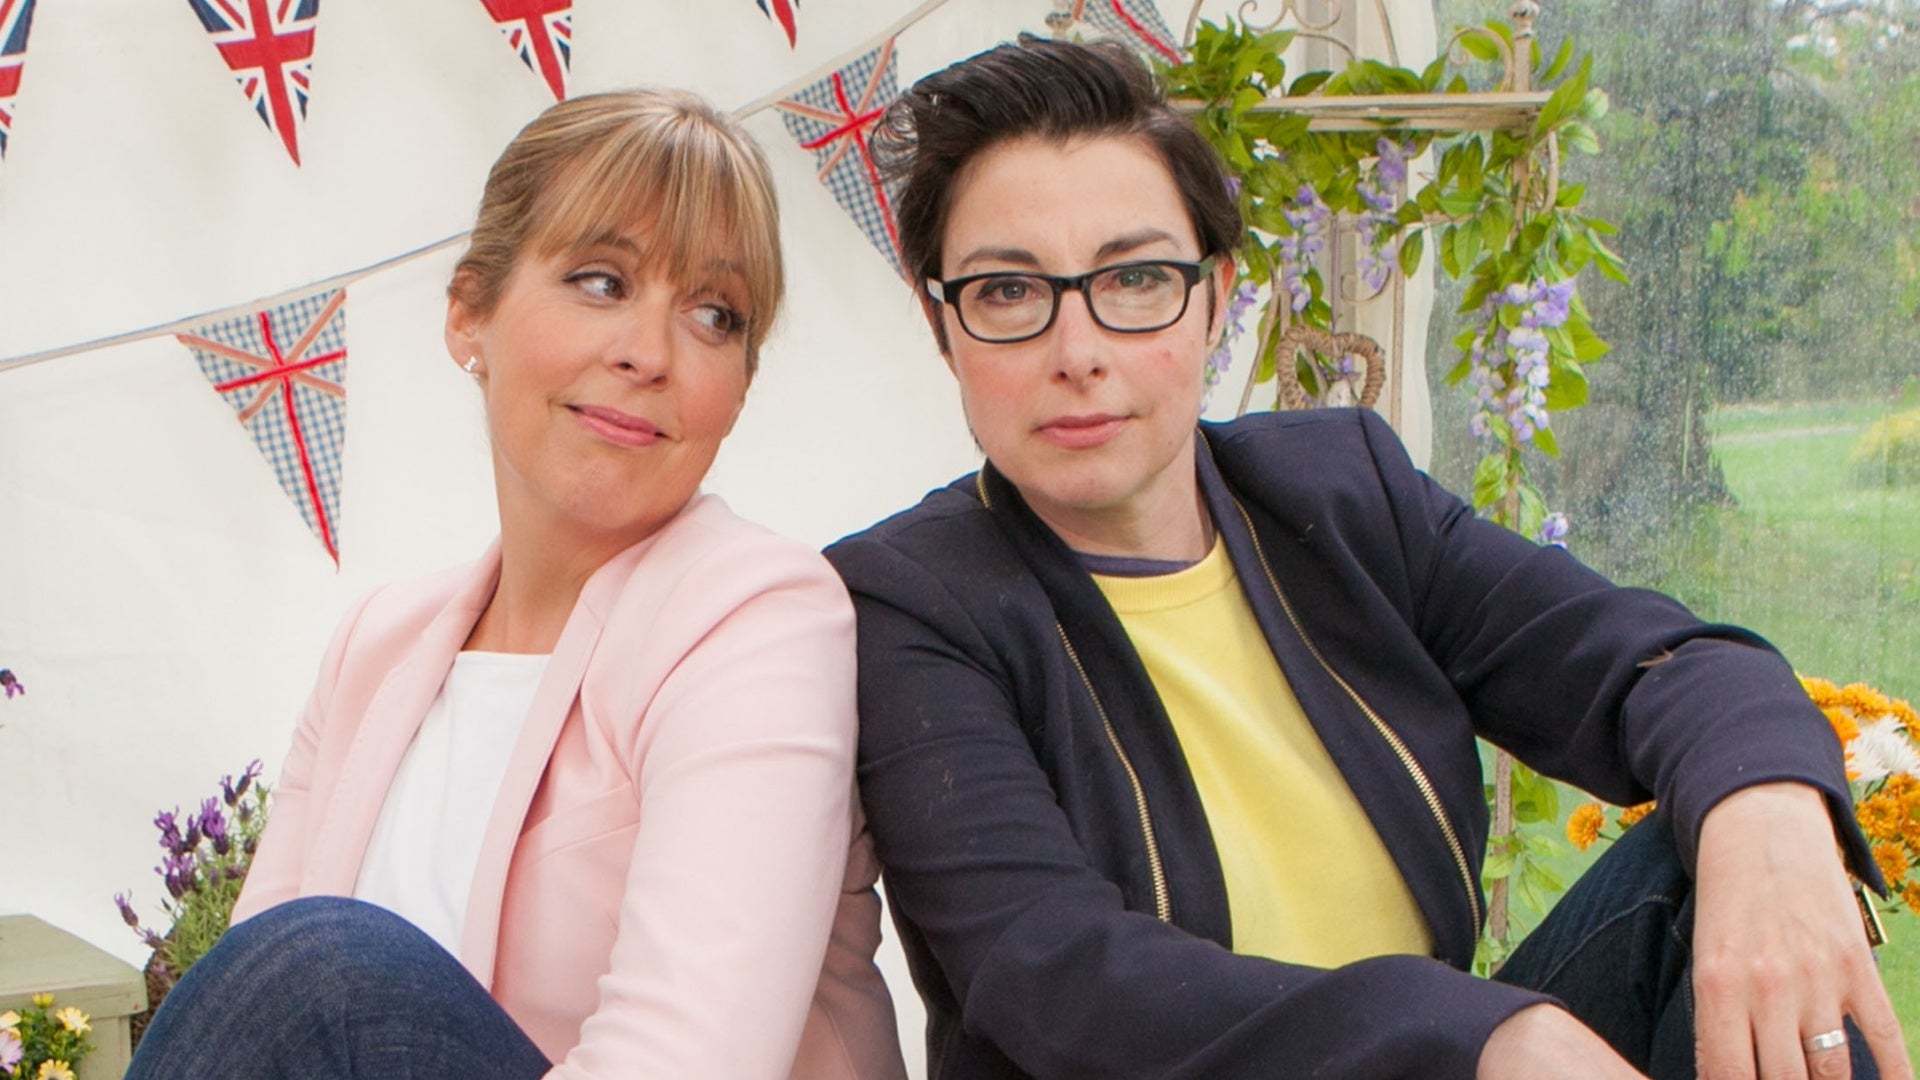 Mel Giedroyc and Sue Perkins return to host The Great British Bake Off on BBC1 this evening